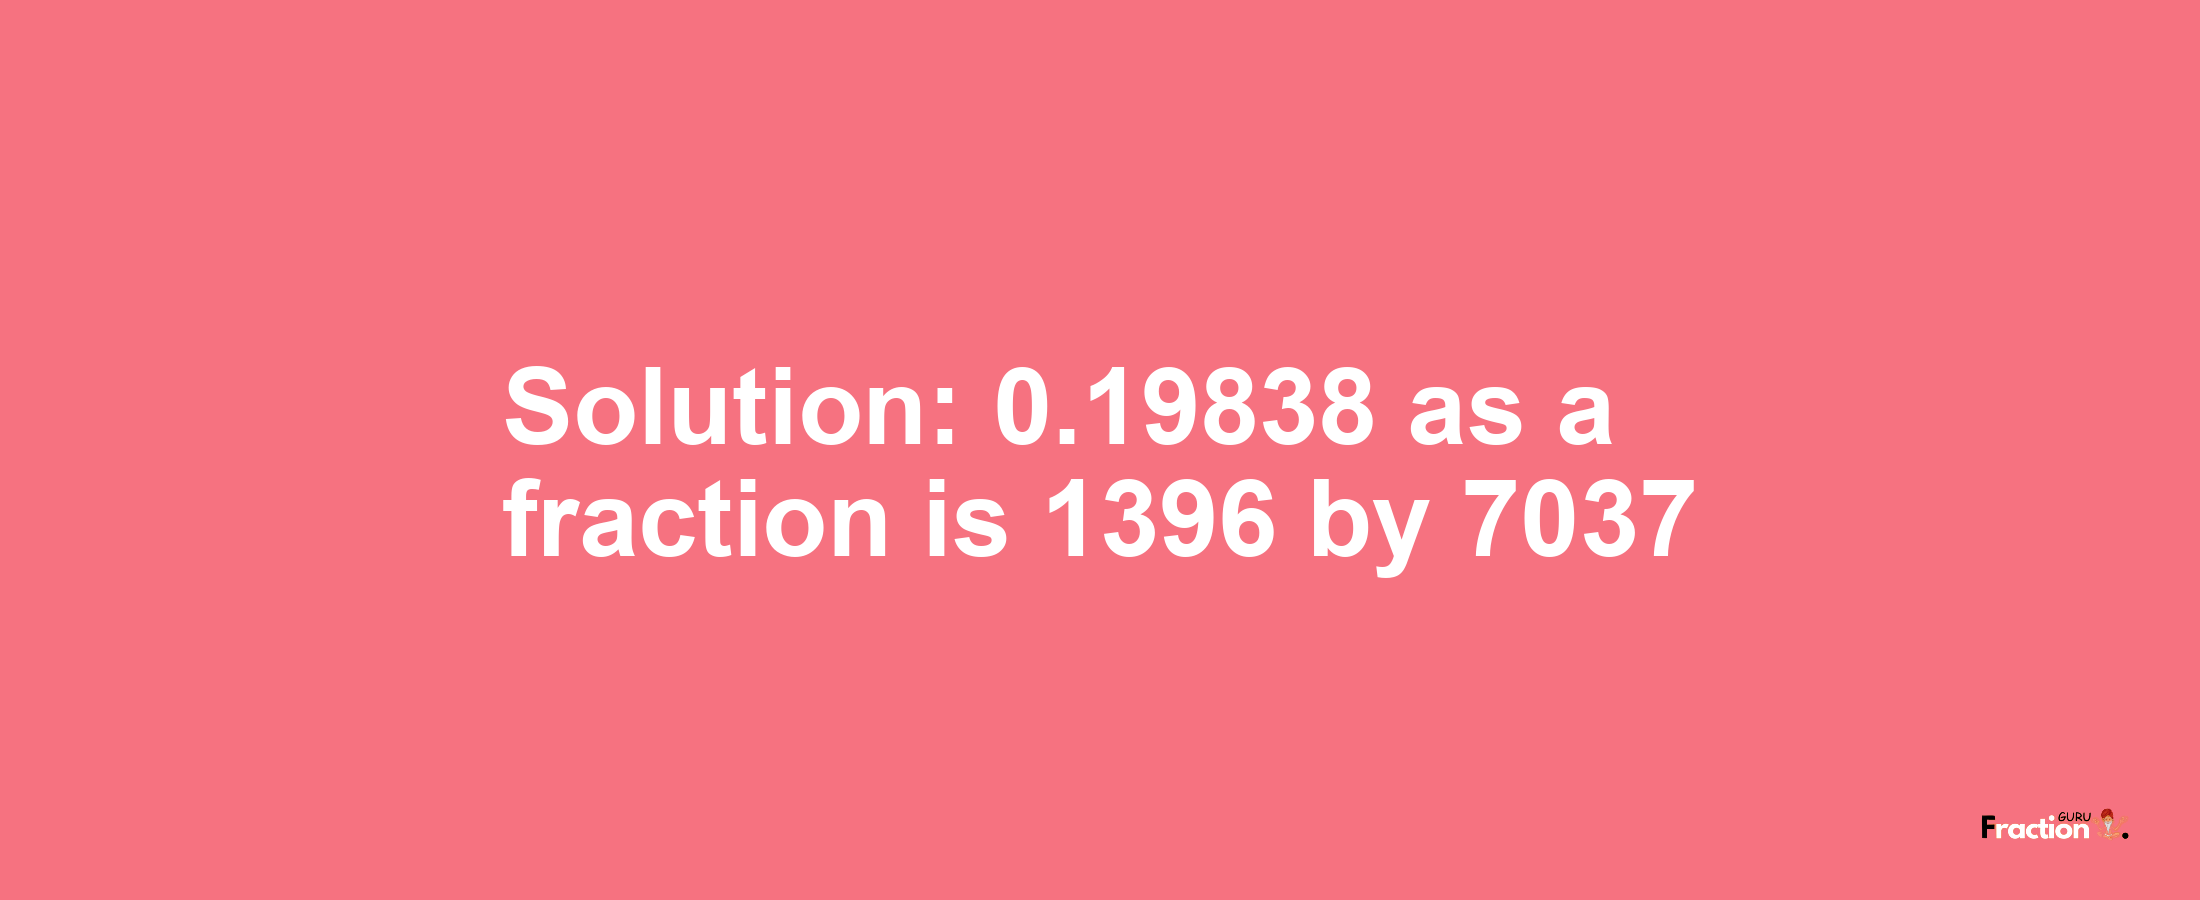 Solution:0.19838 as a fraction is 1396/7037